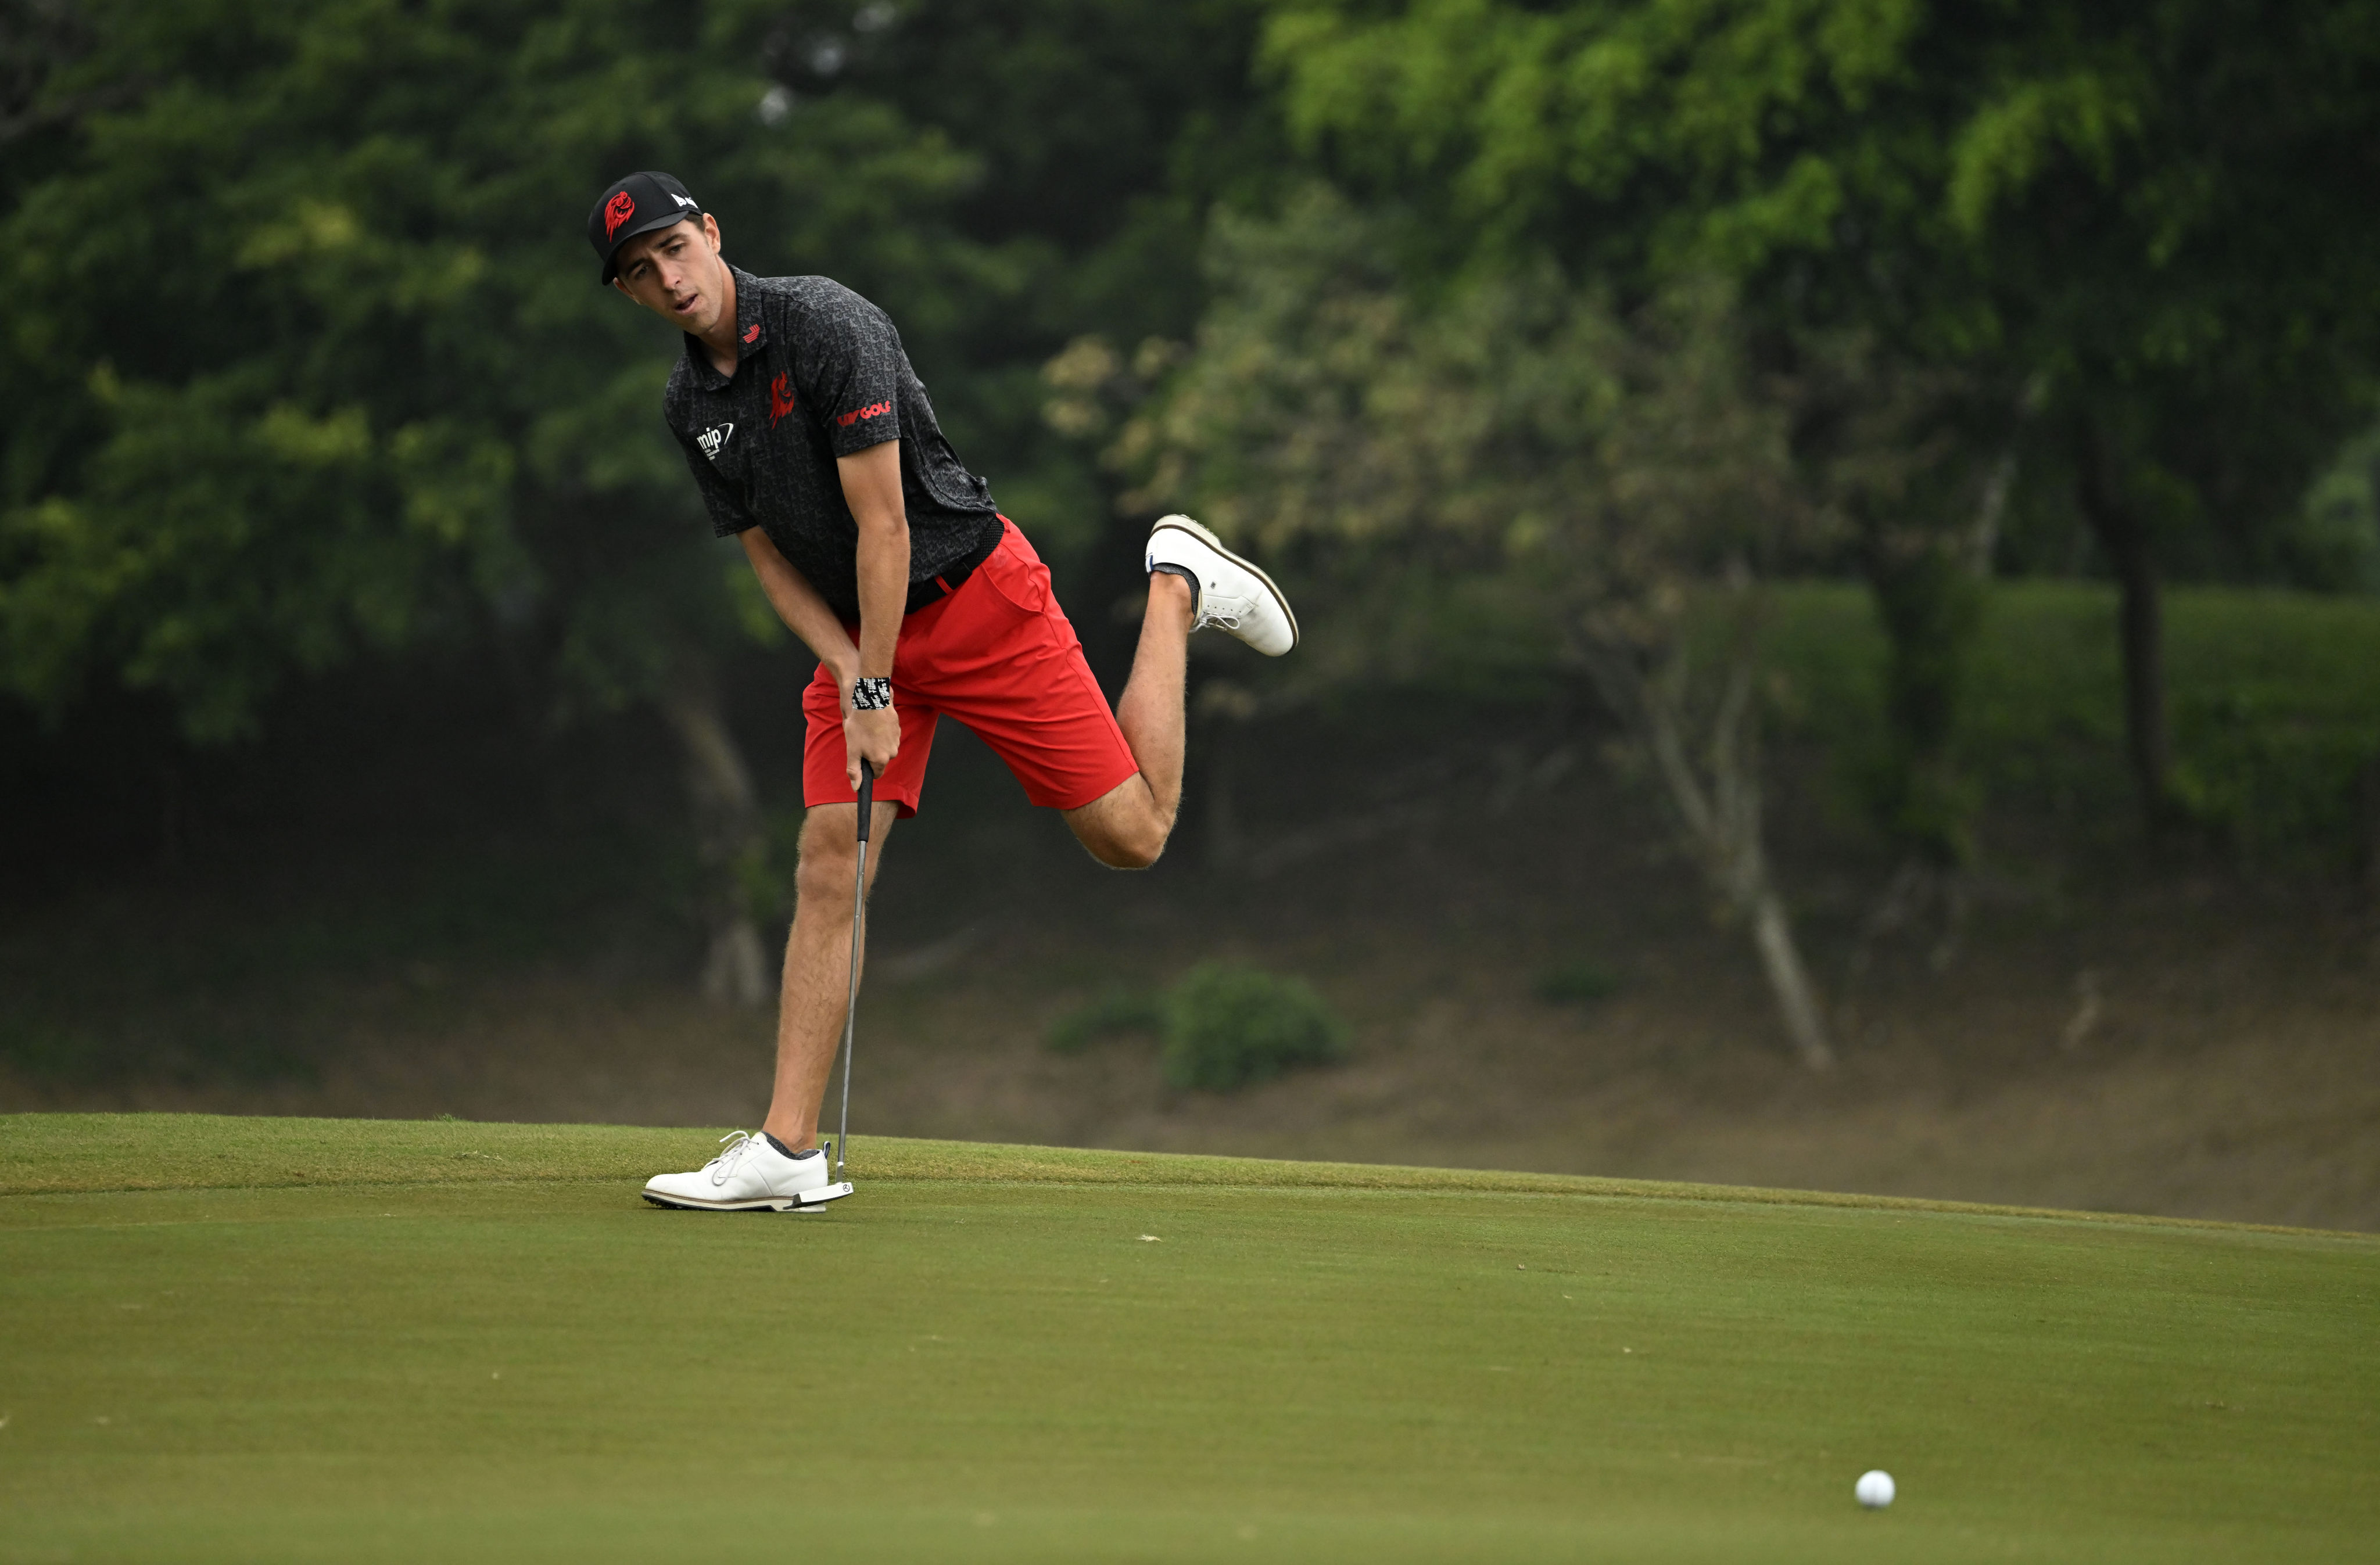 David Puig hits a putt during the second round of the International Series Macau. Photo: Asian Tour